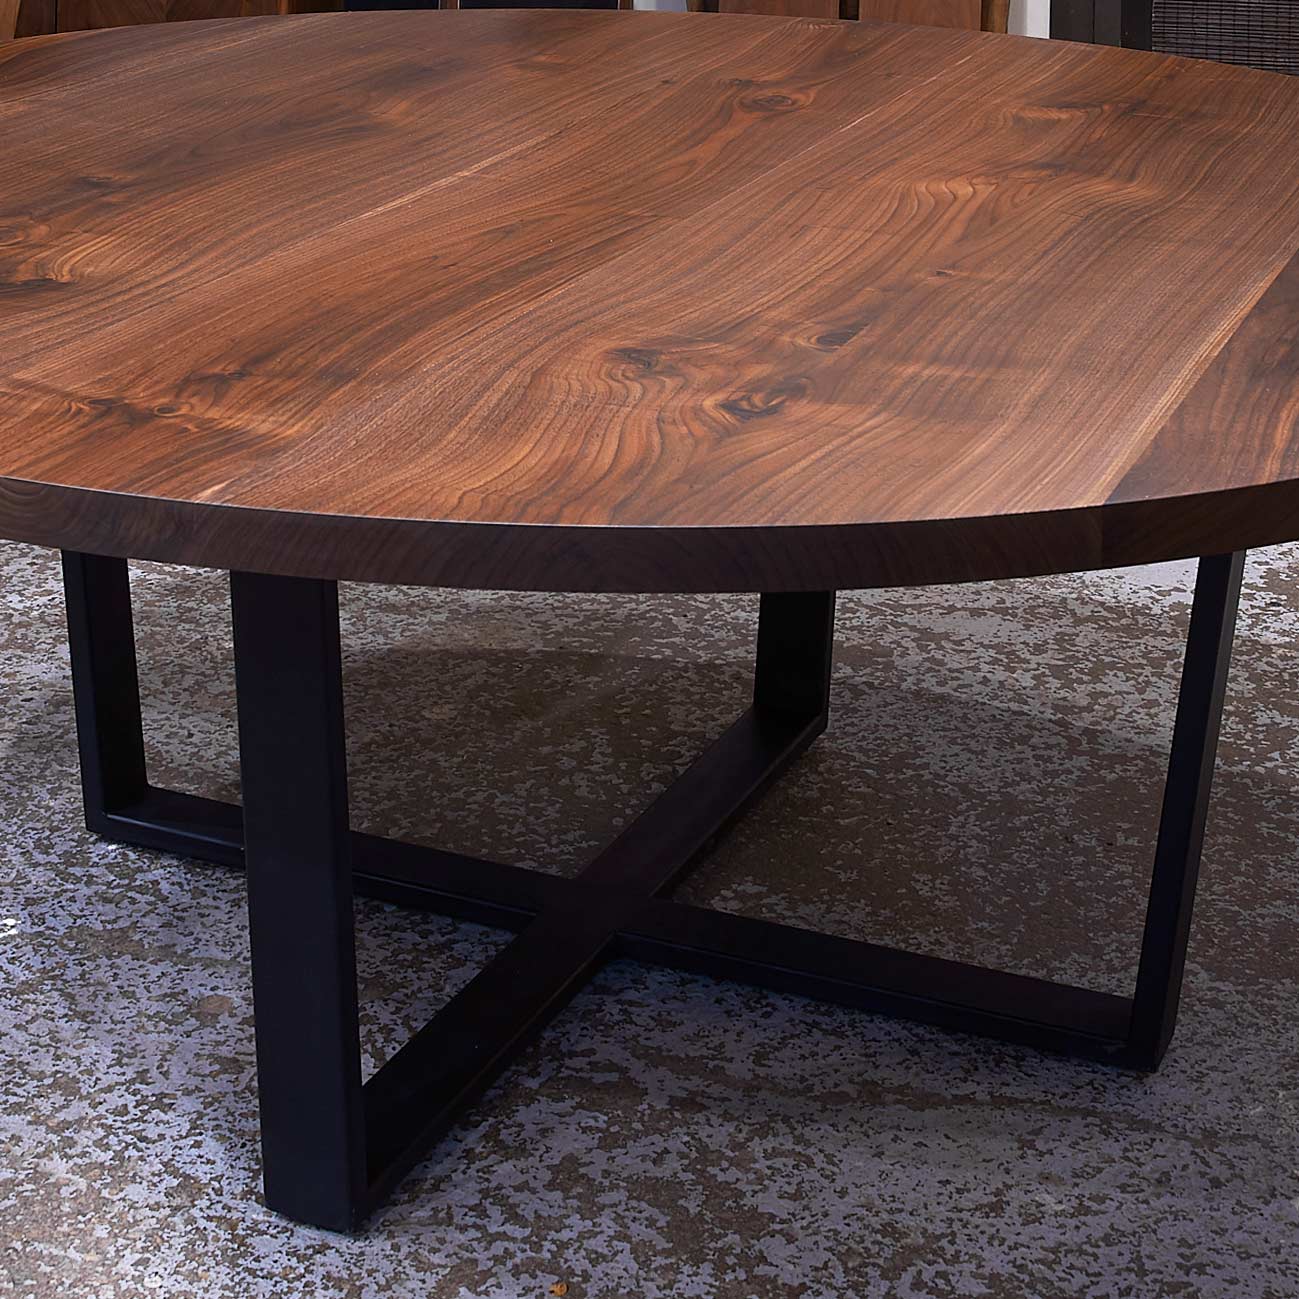 72" diameter round solid wood Walnut dining table with crossed trapezoid base at the Chicago area table showroom